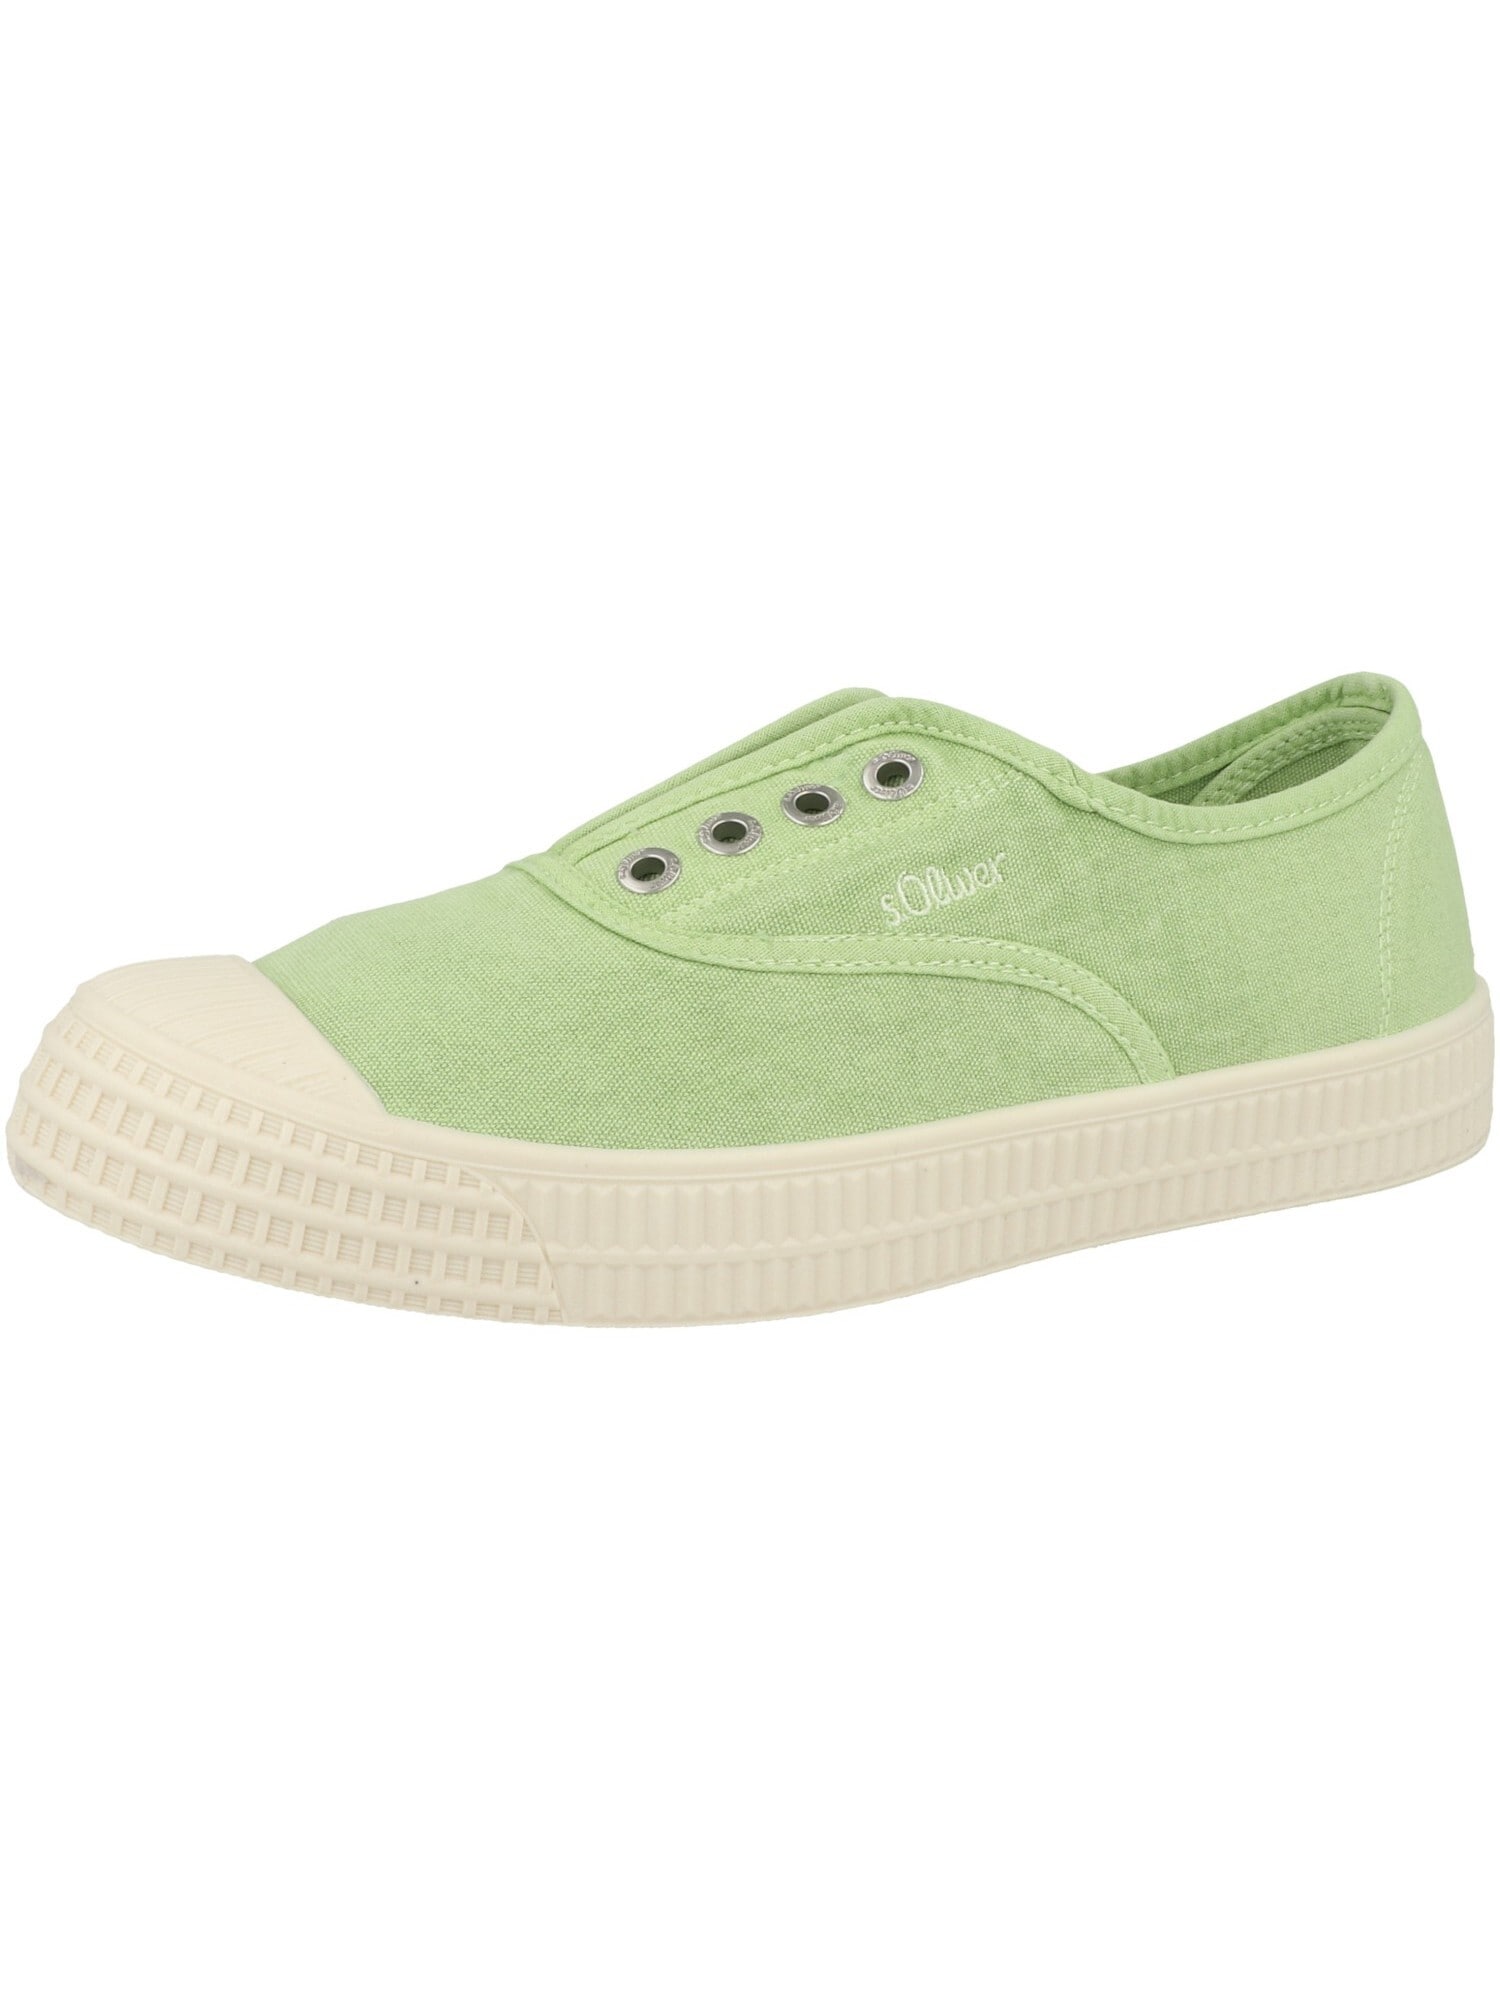 s.Oliver Sneaker low ' 5-24651-28 '